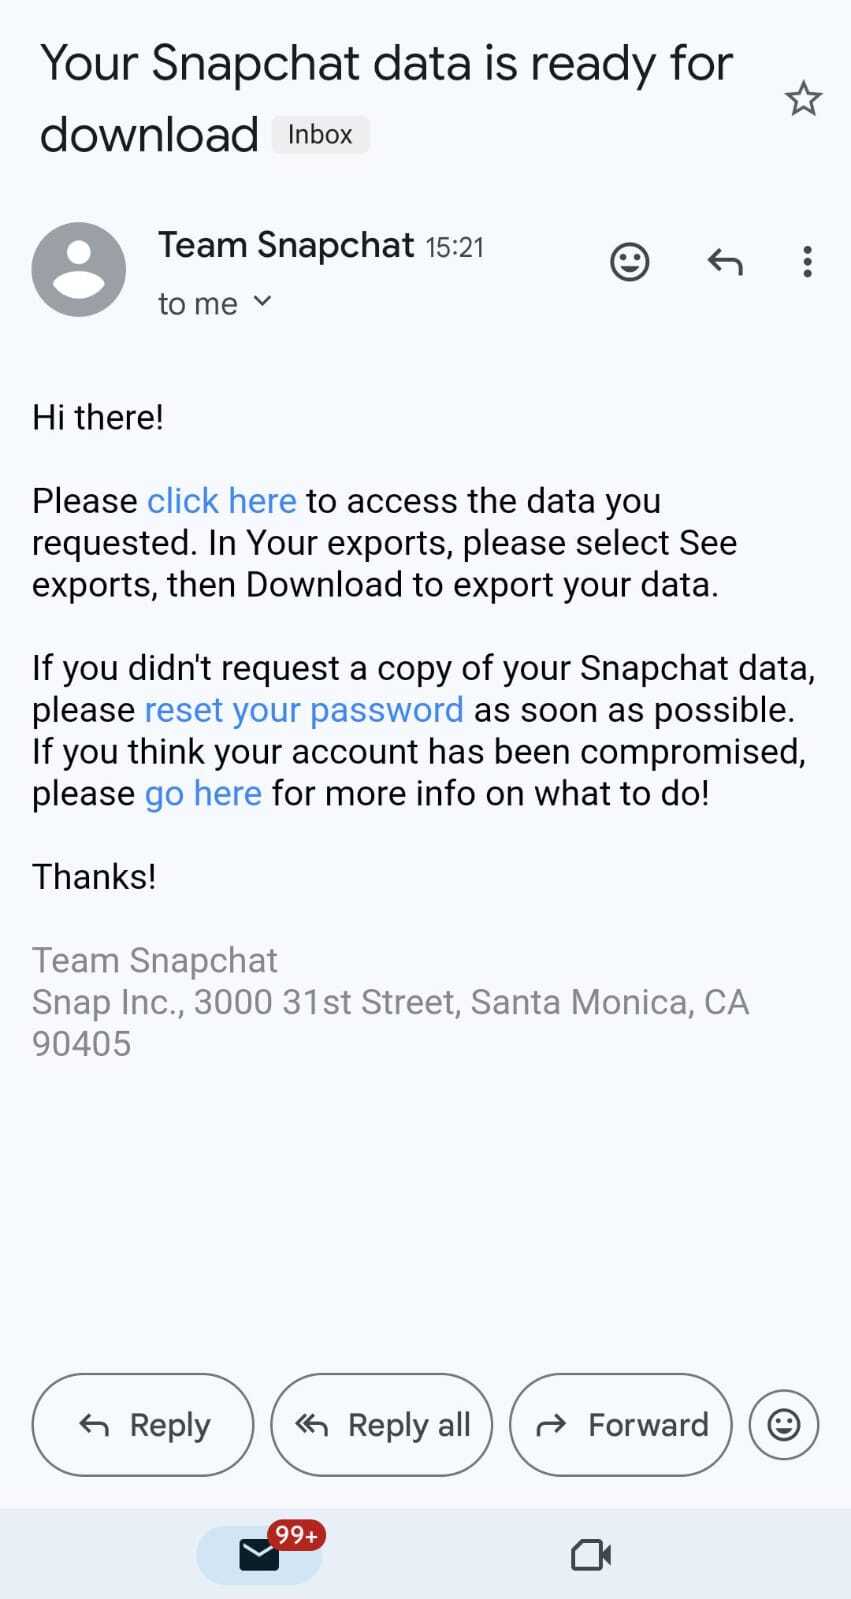 Guide for downloading your Snapchat data